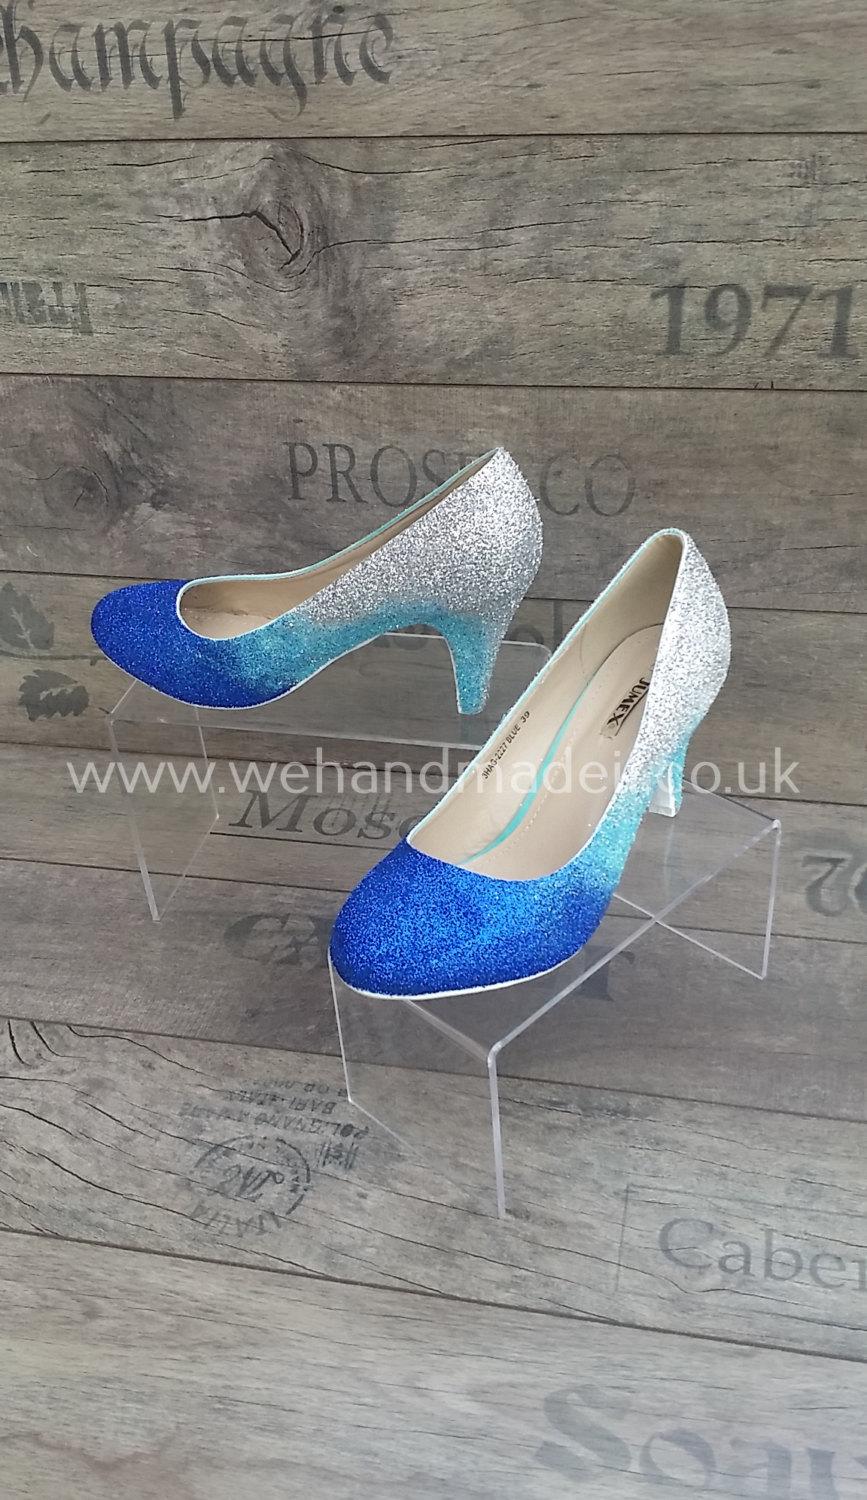 Mariage - Custom made blue to silver graded glitter shoes - any style or size.  Wedding shoes, prom shoes, custom glitter shoes made to order